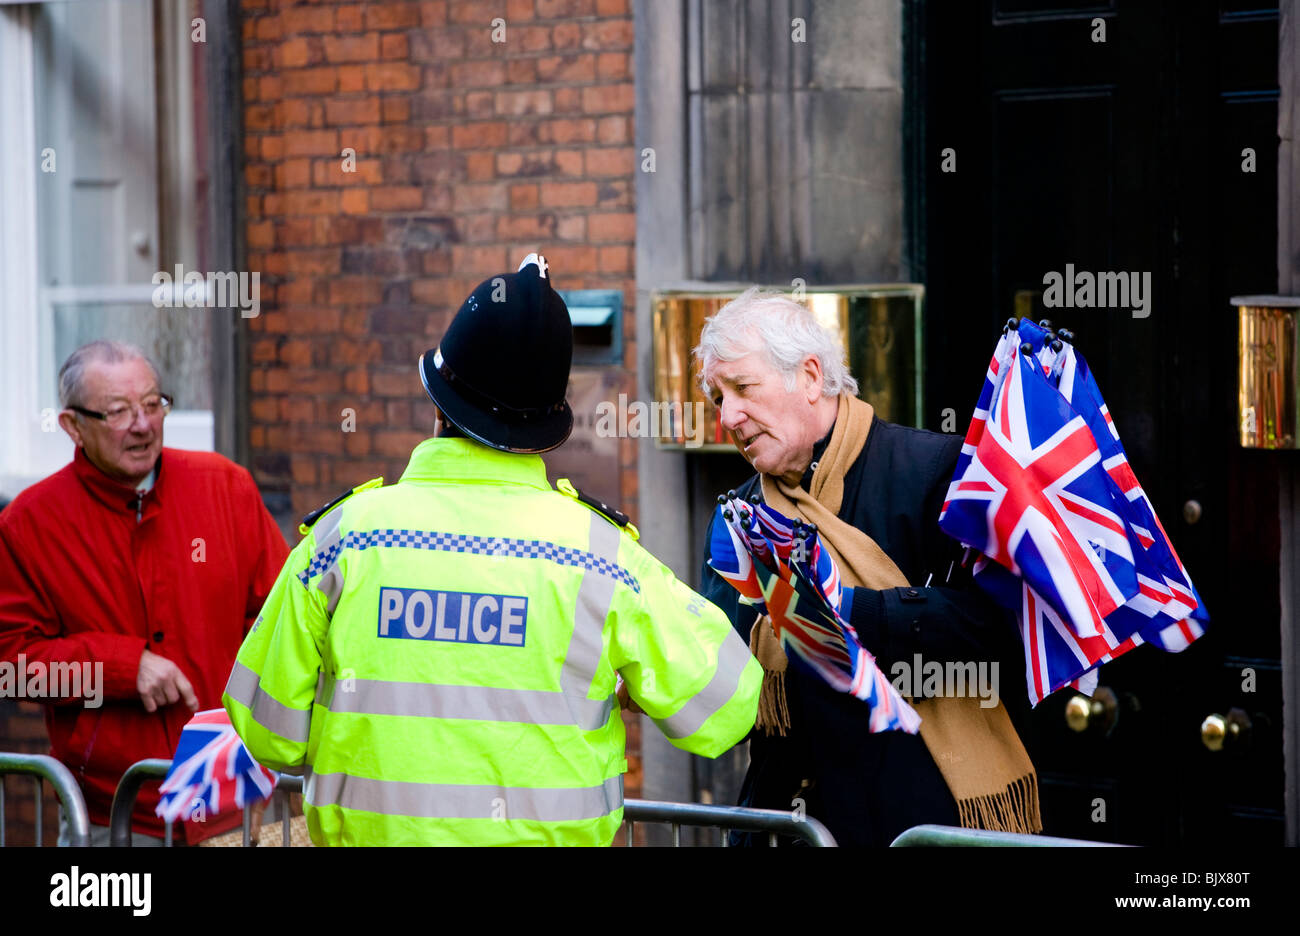 A UK policeman chats with a gentleman flag seller at an event in Derby where the Queen is to attend. Stock Photo